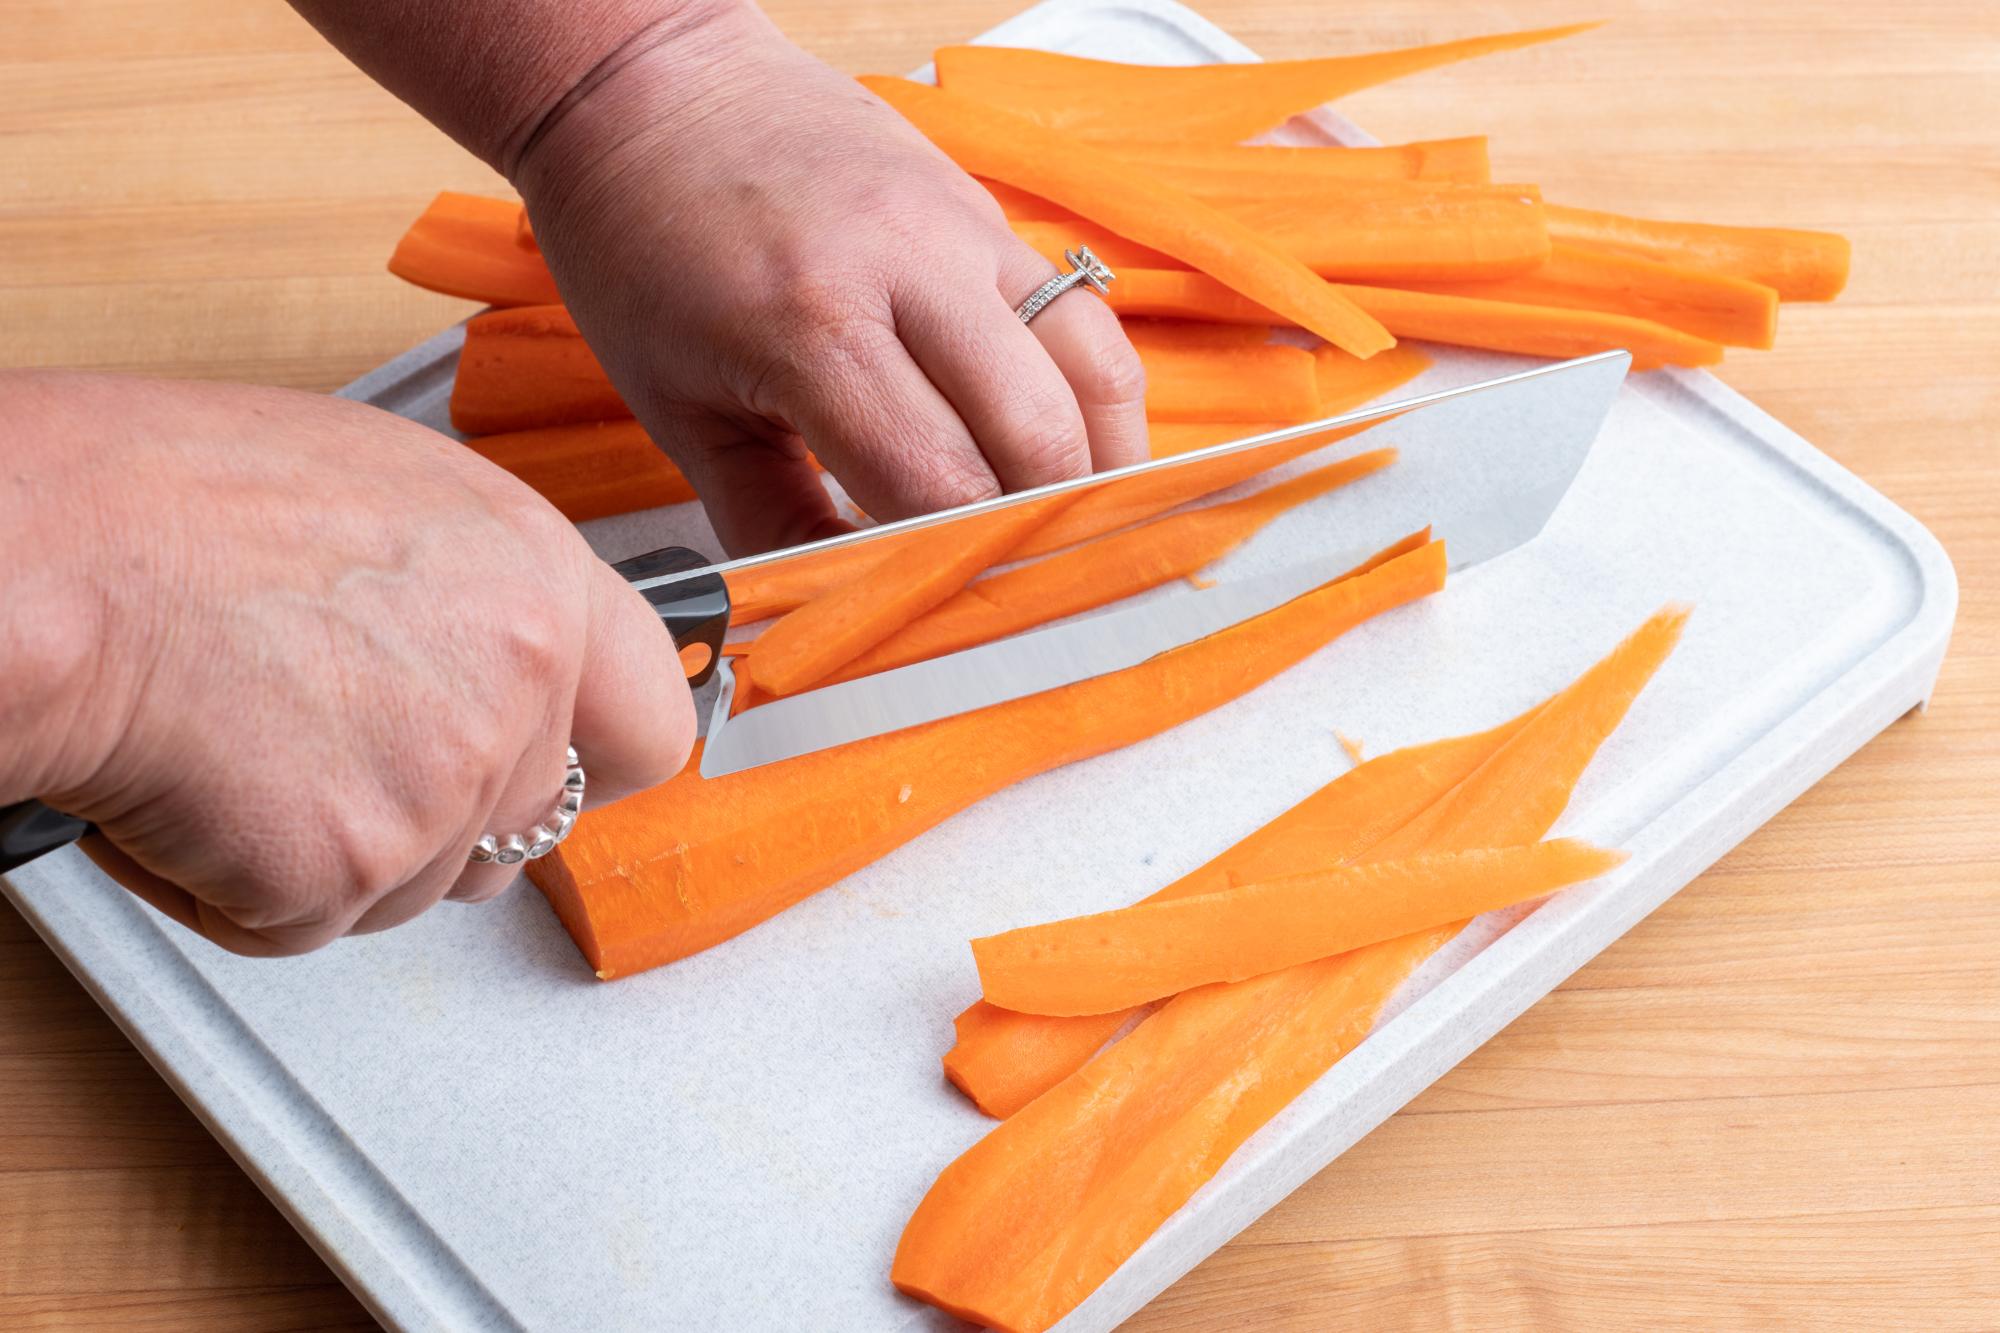 using a Vegetable Knife to cut the carrots into planks